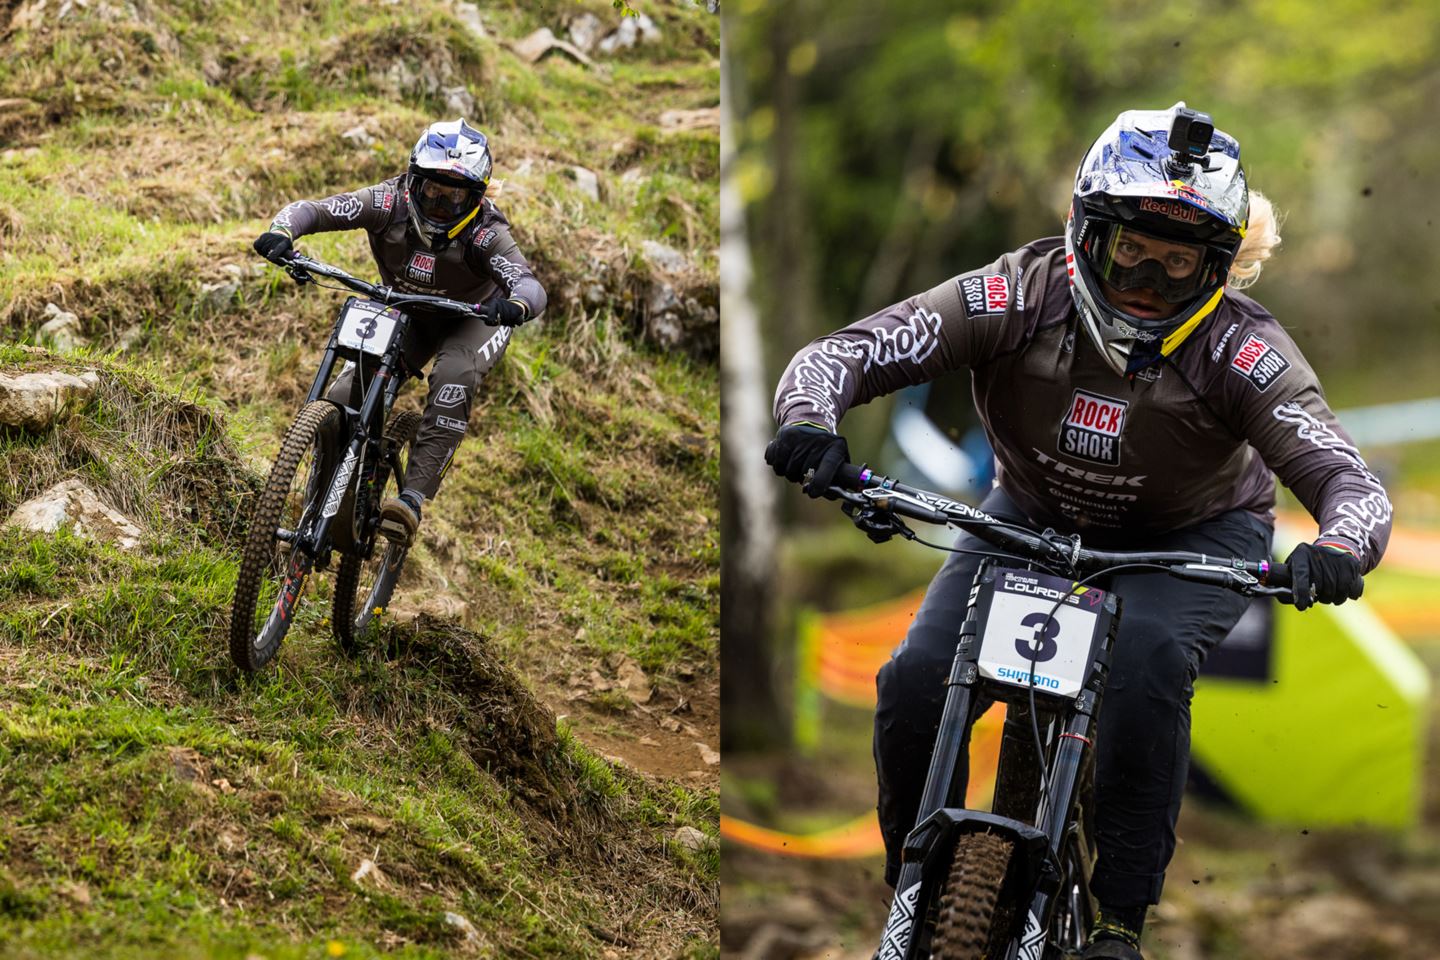 (Left) Vali riding on a grassy track at the UCI Test Event in Lourdes, France. (Right) A close-up shot of Vali practicing at the UCI Test Event in Lourdes, France.